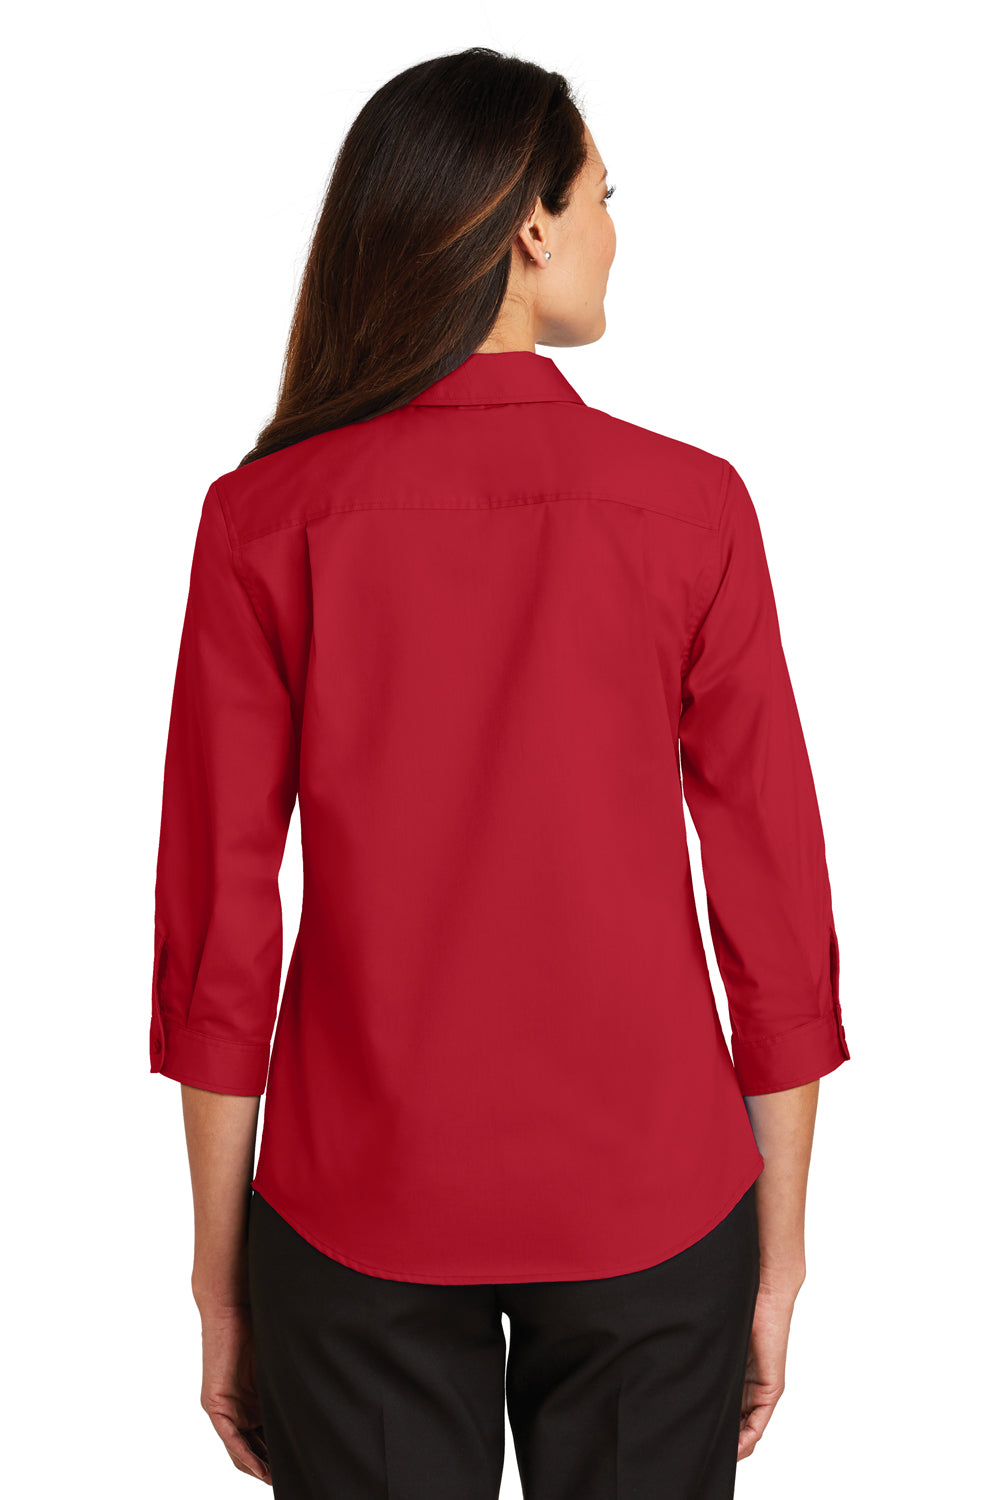 Port Authority L665 Womens SuperPro Wrinkle Resistant 3/4 Sleeve Button Down Shirt Red Back